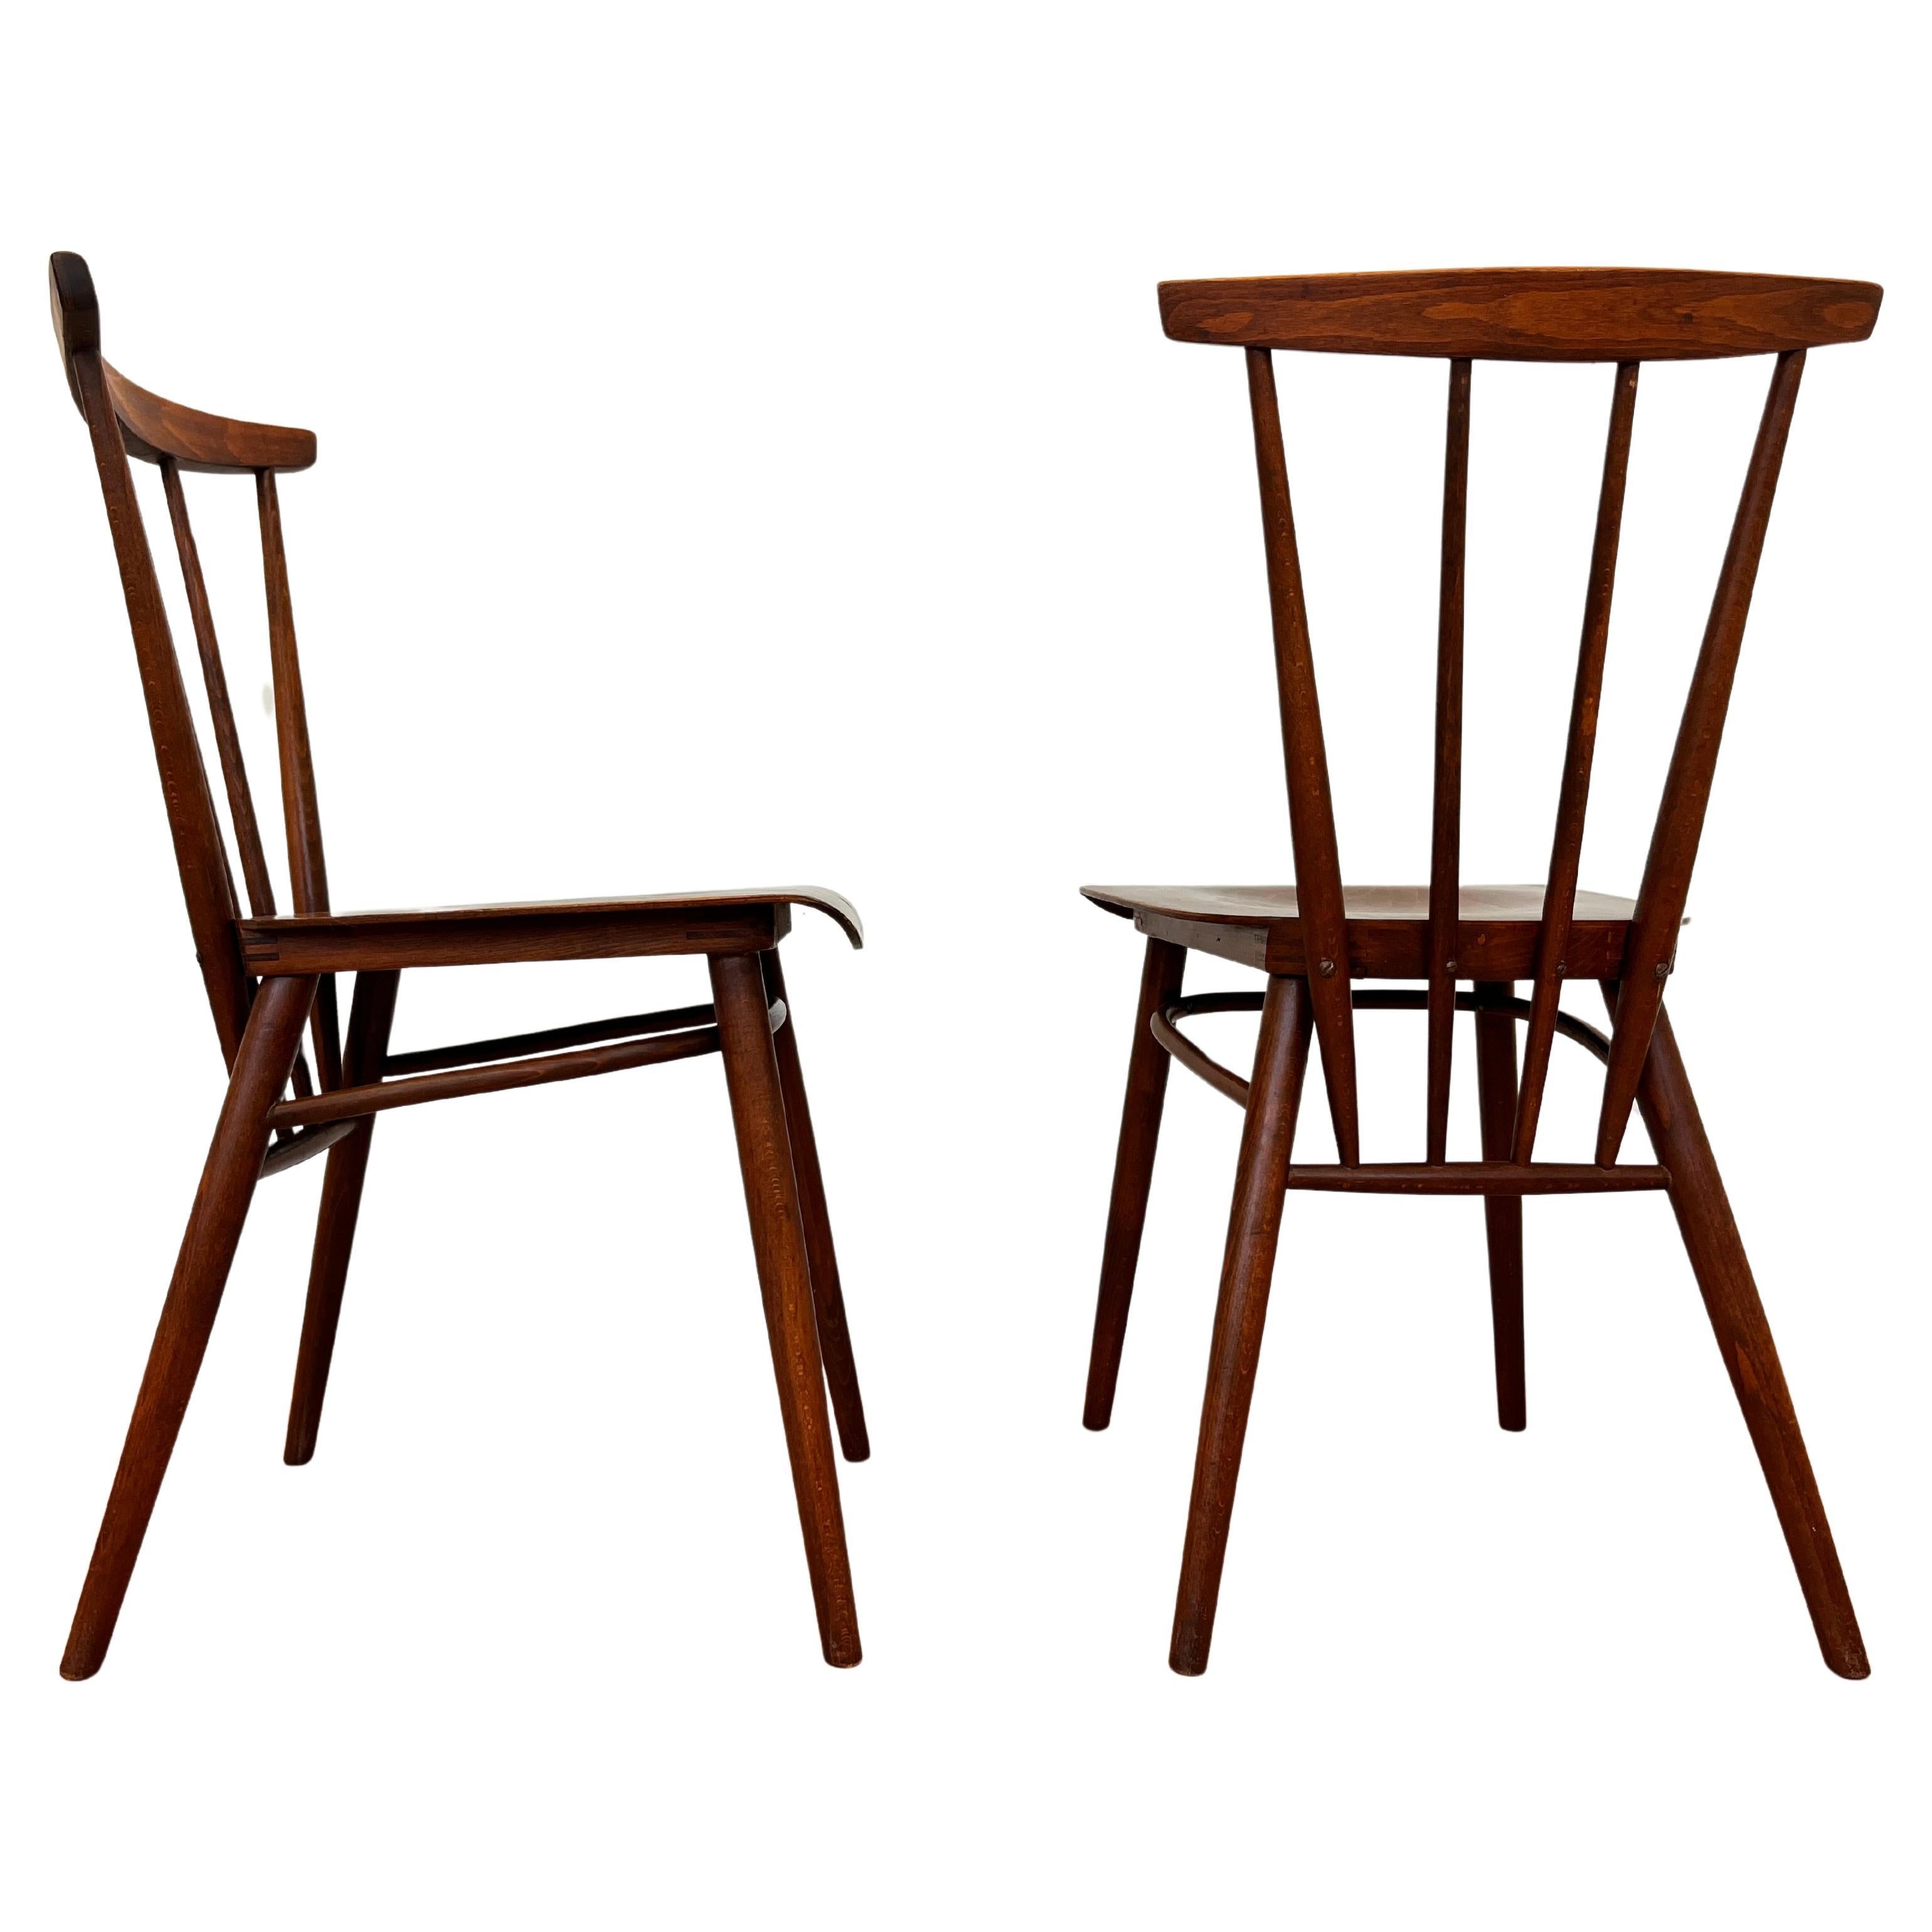 Set of Four MID century DEsign wooden Dining Chairs by TON - 1960s